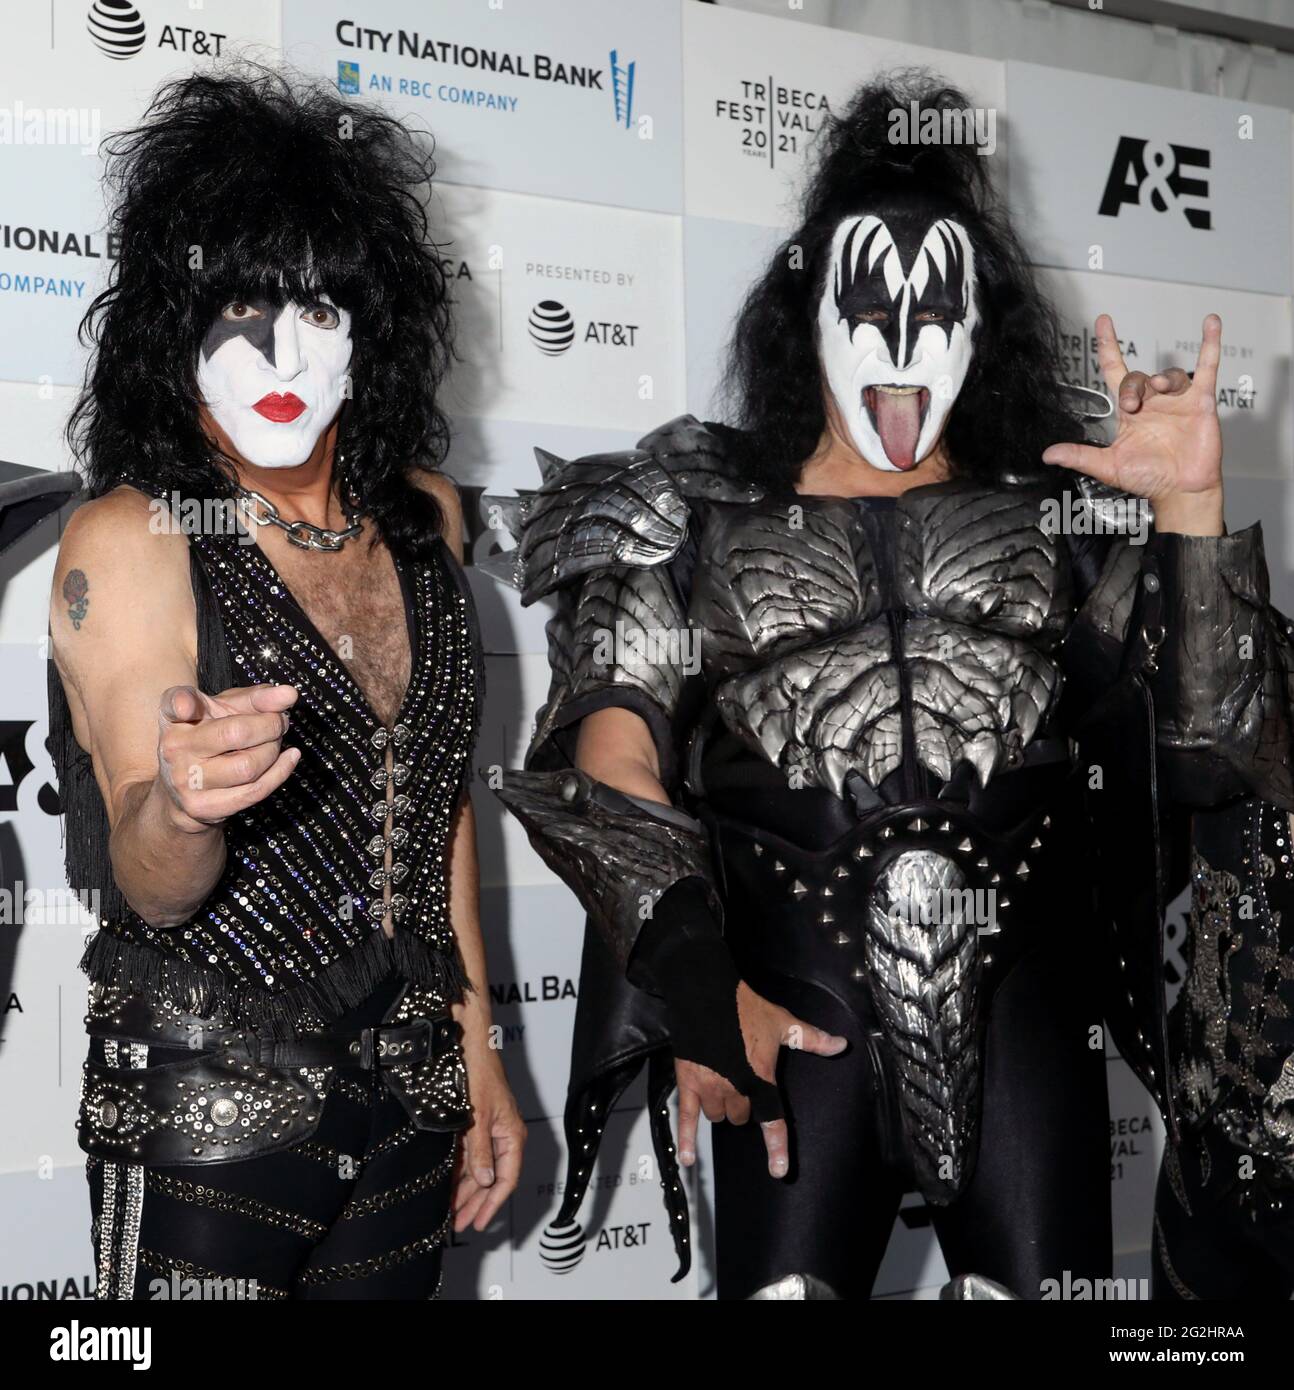 June 11, 2021, New York, New York, USA: (L-R) Original members PAUL STANLEY and GENE SIMMONS from the band KISS attend the premiere of 'Biography: KISStory' held ding the 2021 TriBeCa Festival at Battery Park. (Credit Image: © Nancy Kaszerman/ZUMA Wire) Stock Photo